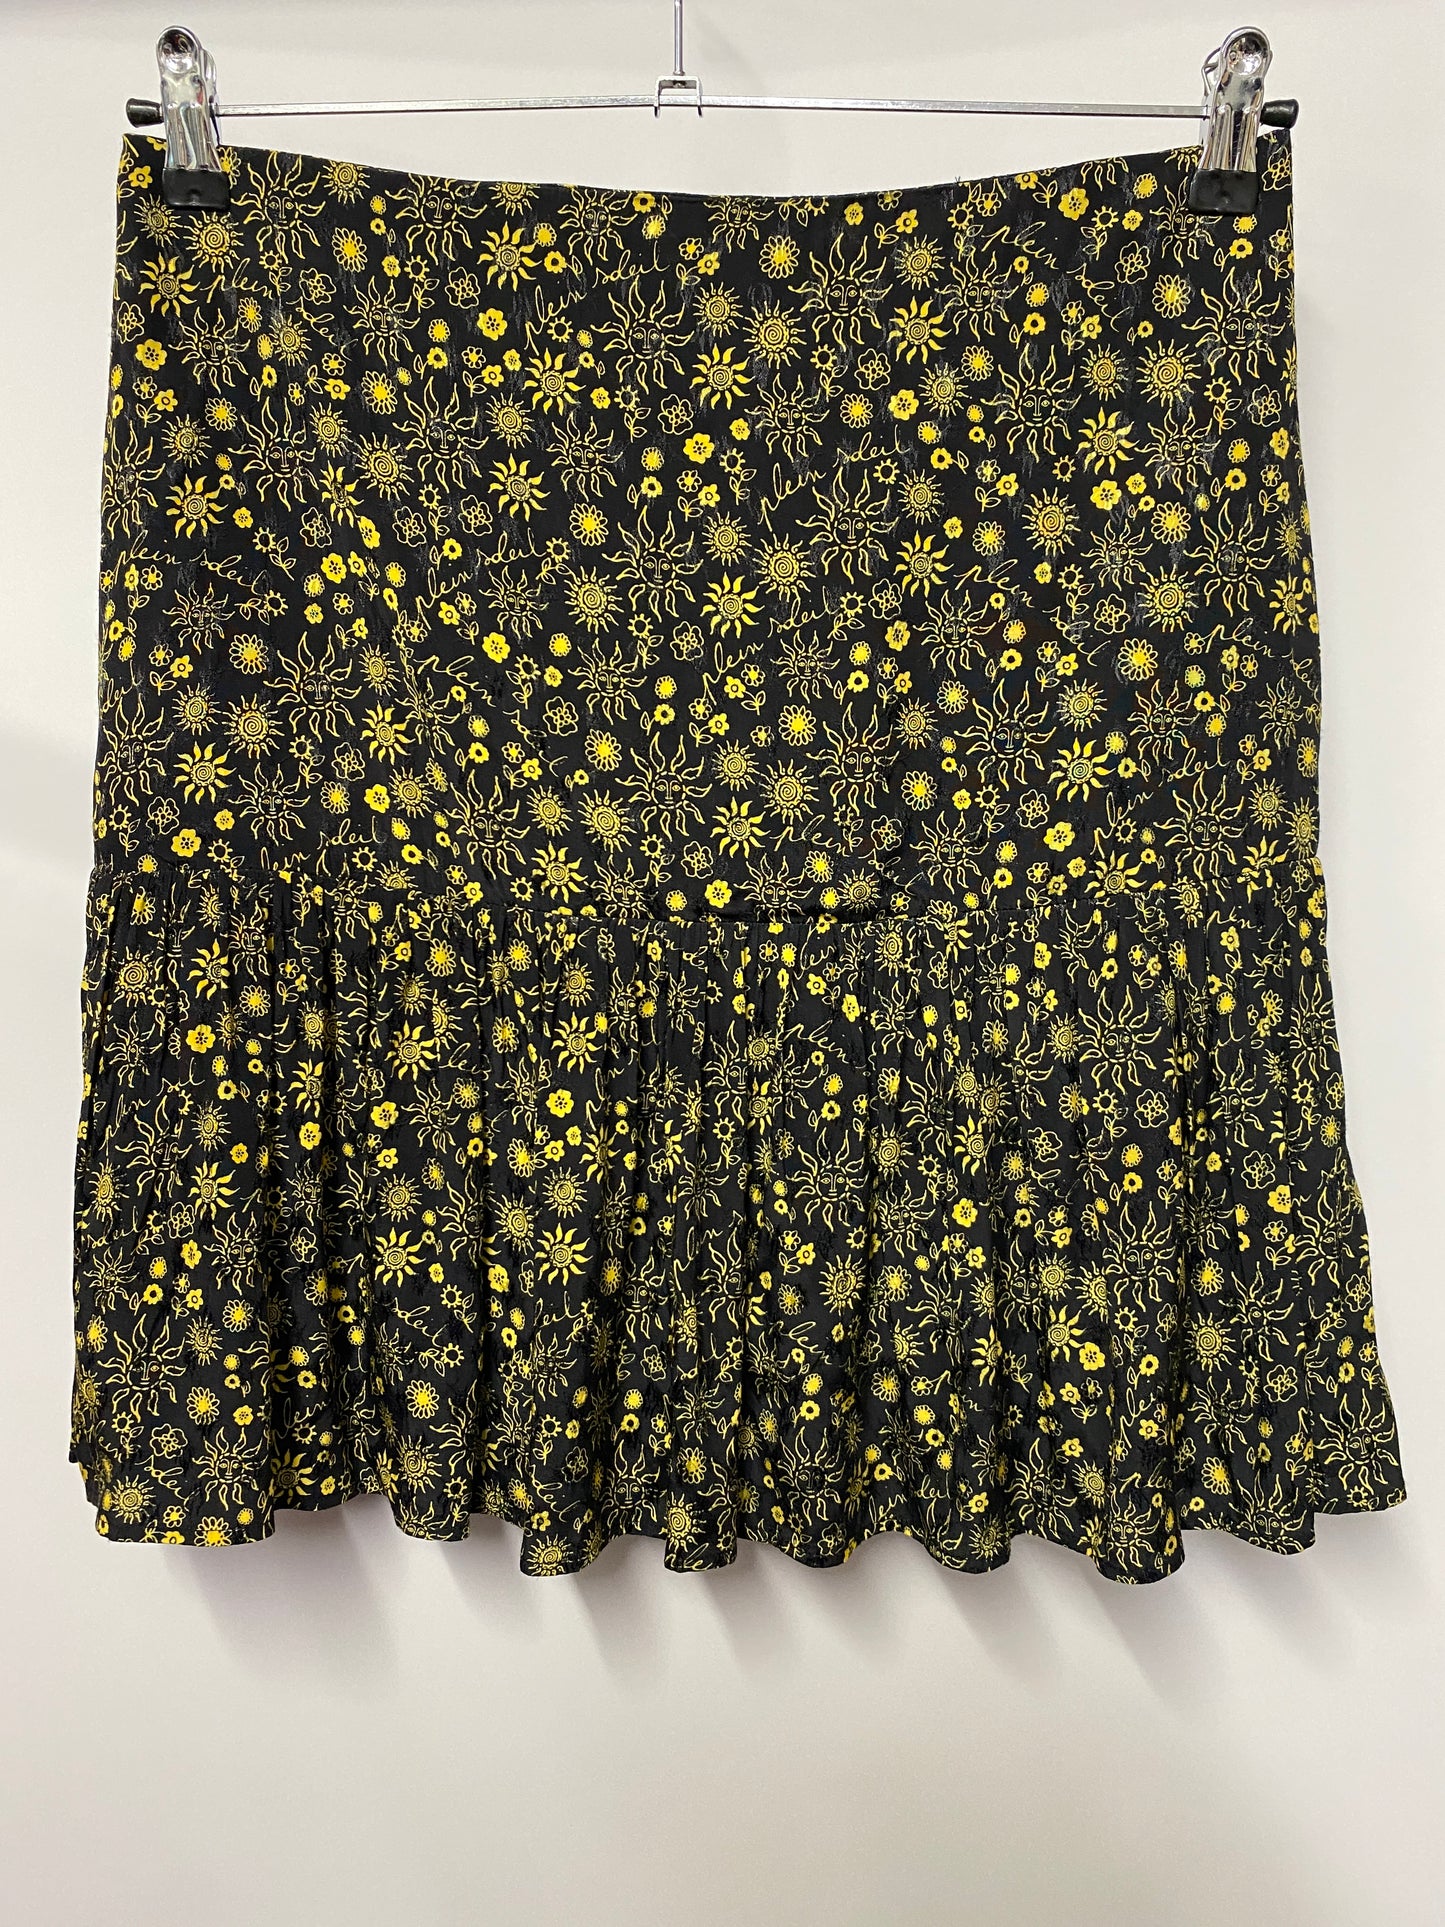 Sandro Black and Yellow Sun Face Printed Tiered Mini Skirt Large